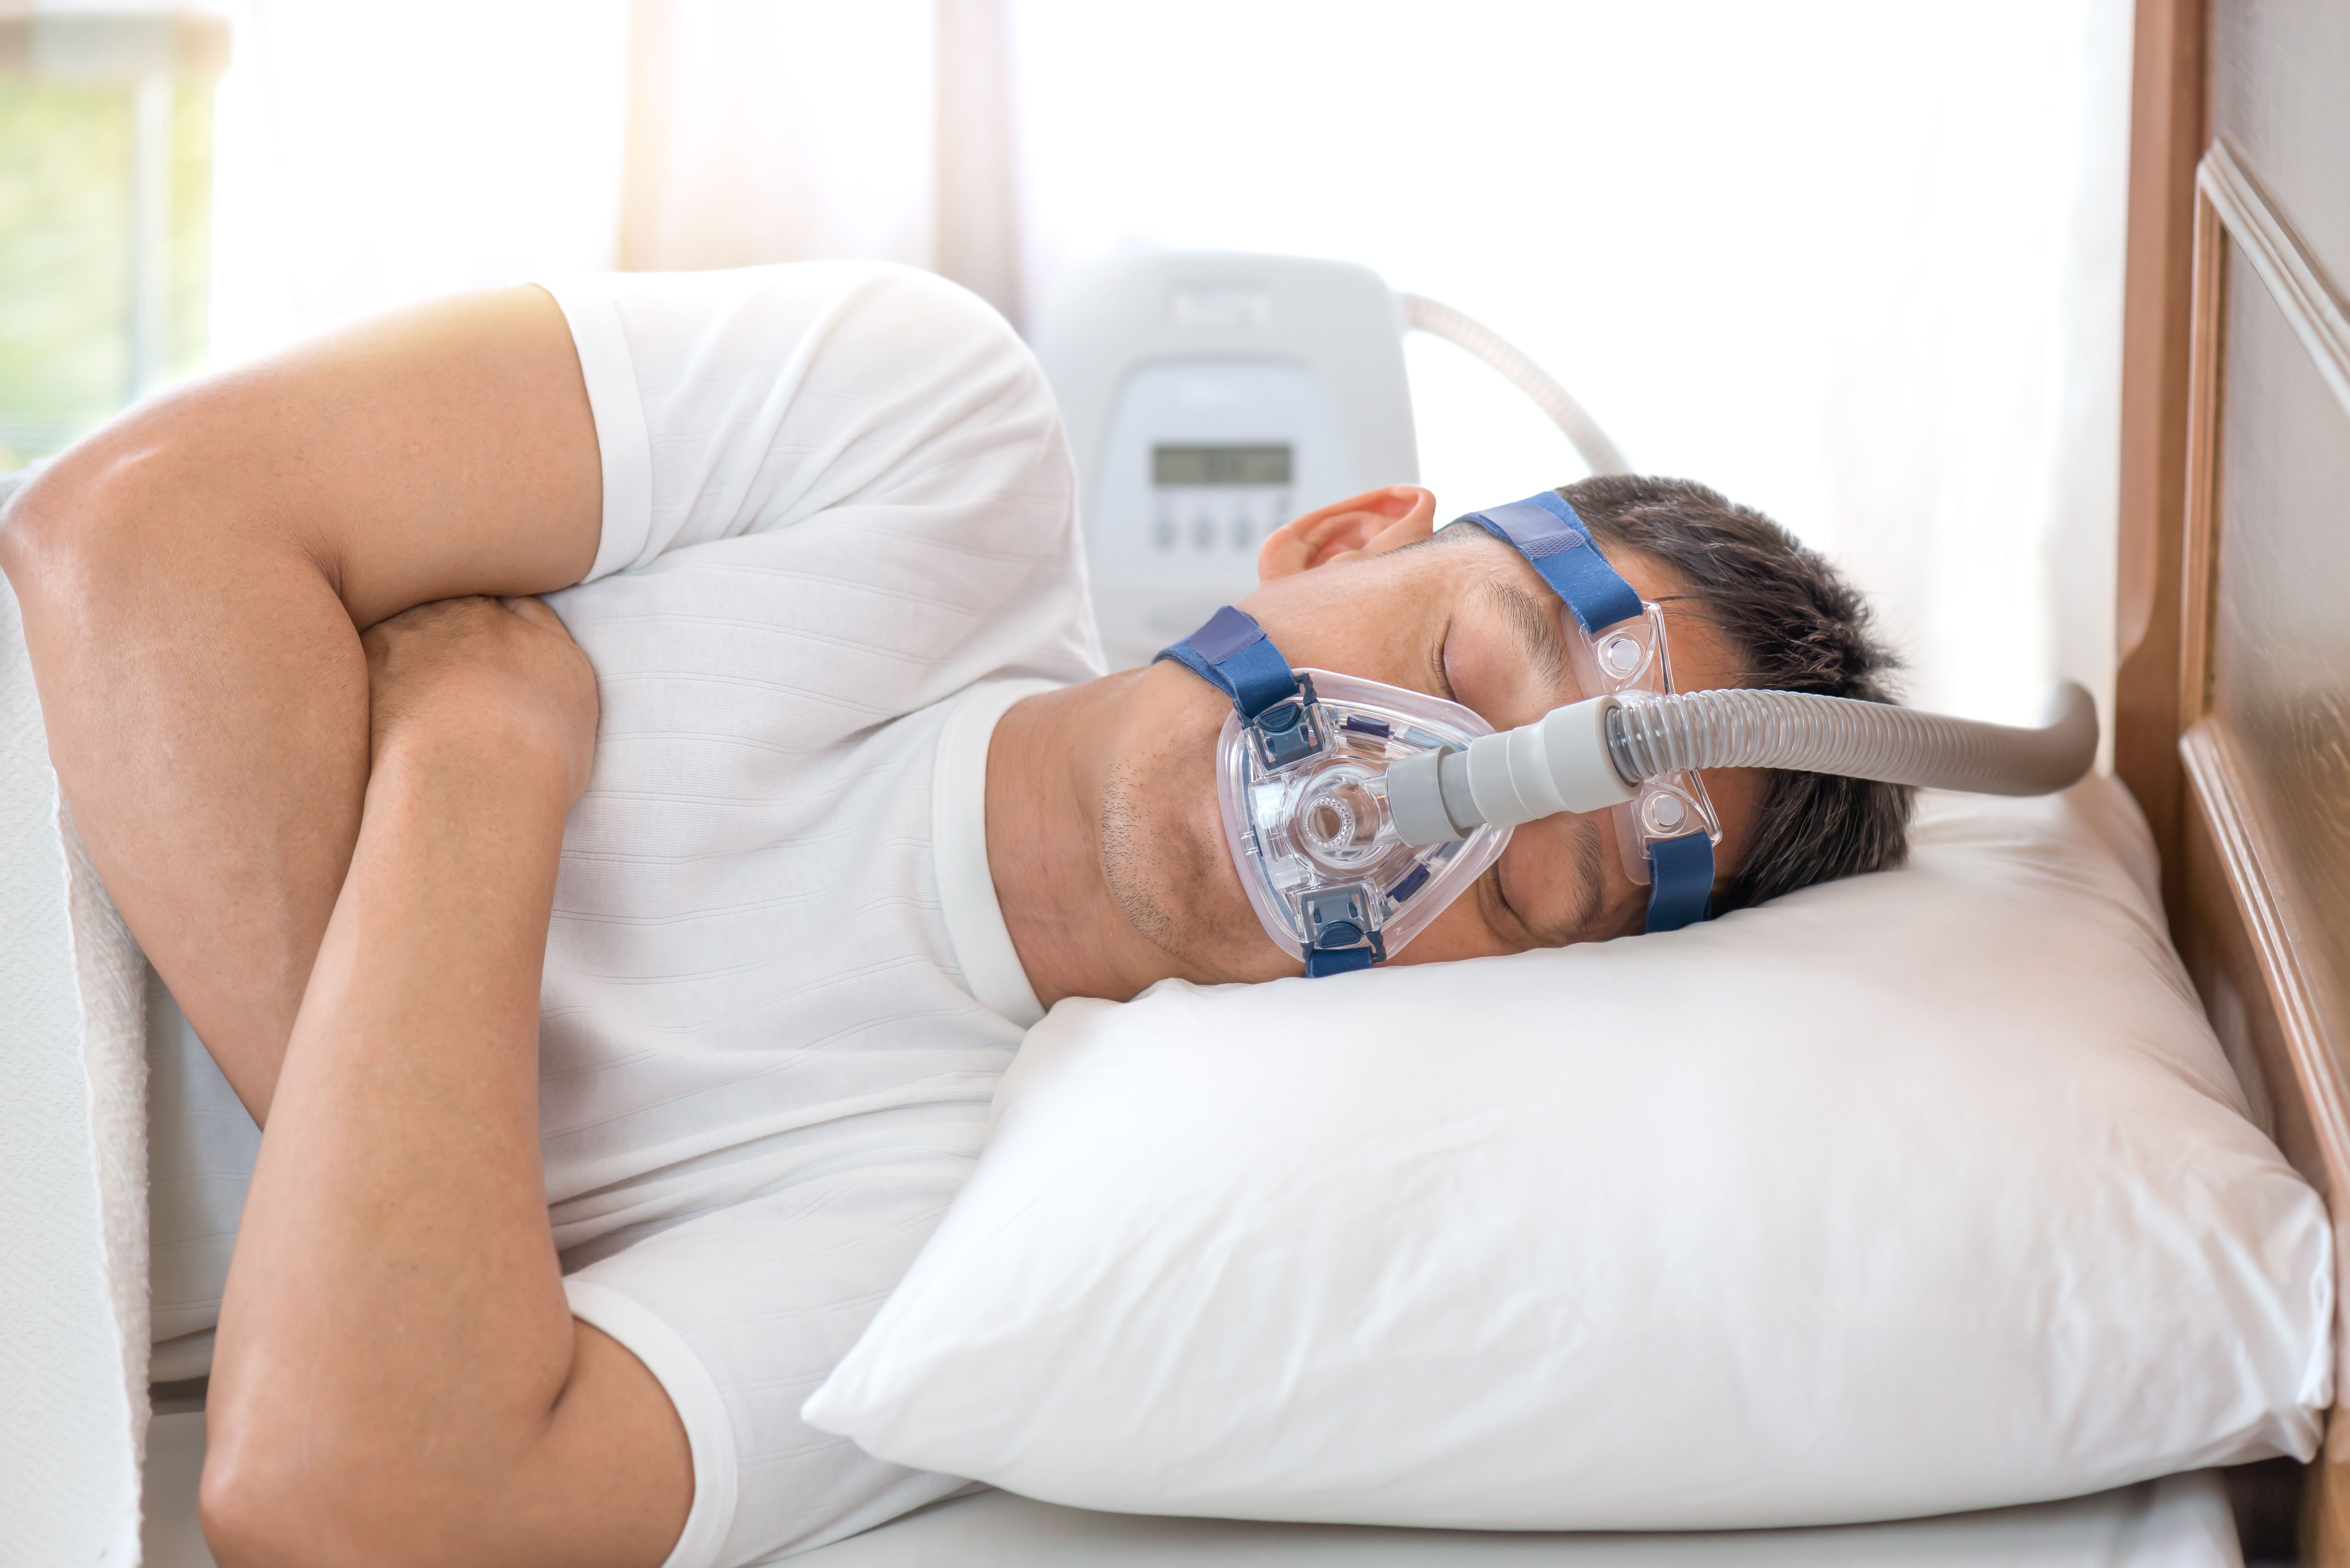 Obstructive sleep apnea may have a significant impact on middle-aged cognitive decline